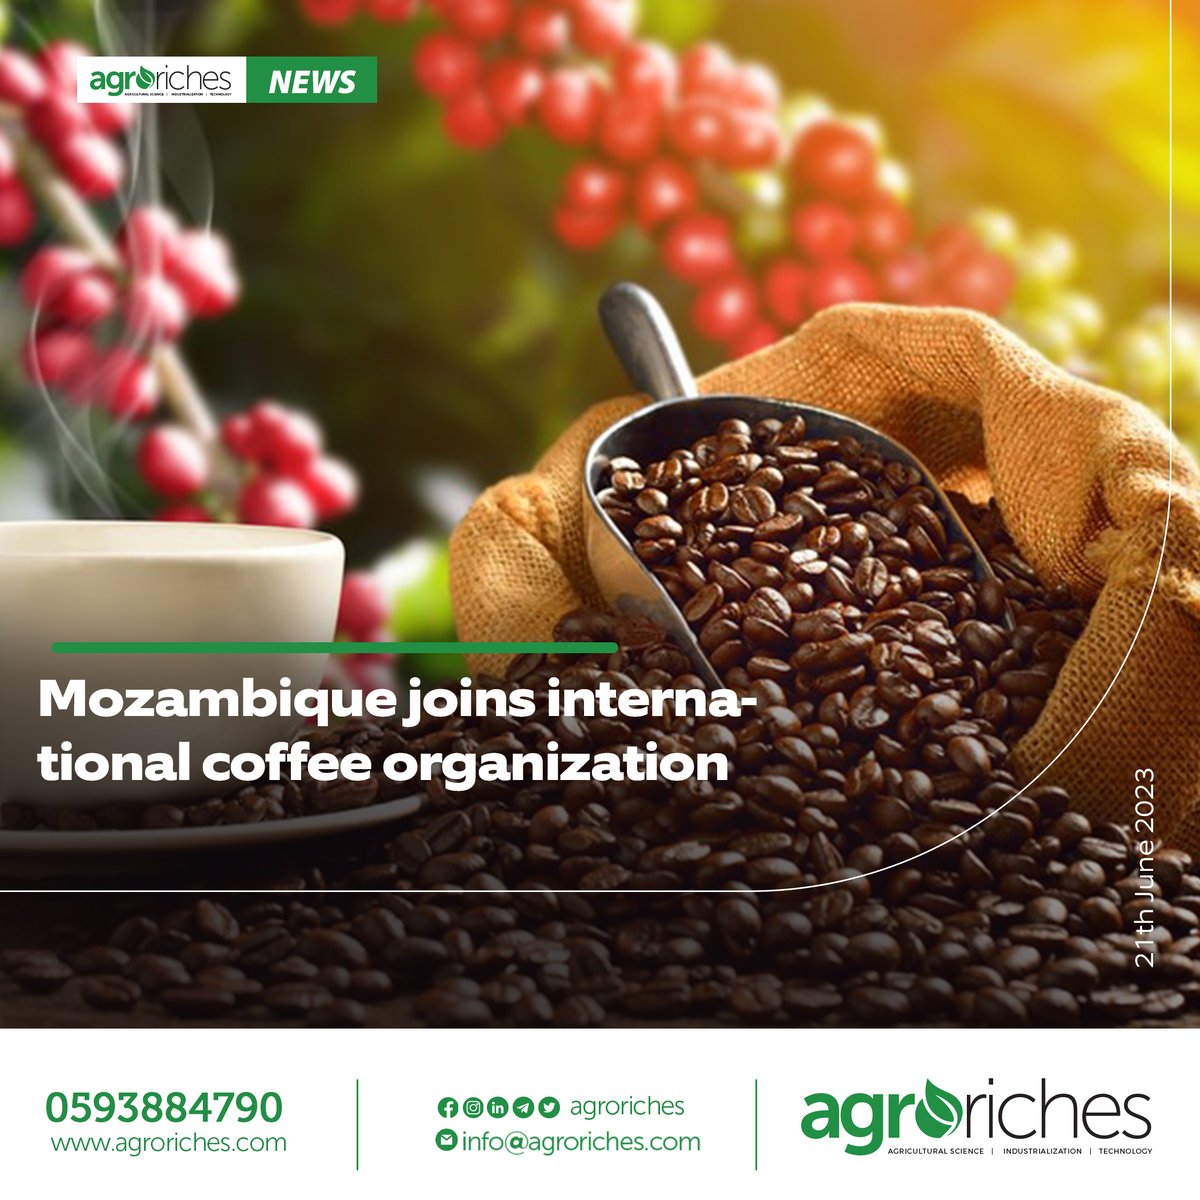 Mozambique joins international coffee organization

agroriches.com/mozambique-joi…

#research #agroriches #farm #agricuture #world #production #agriculturenews #news #quality #potato #farmers #news #coffee